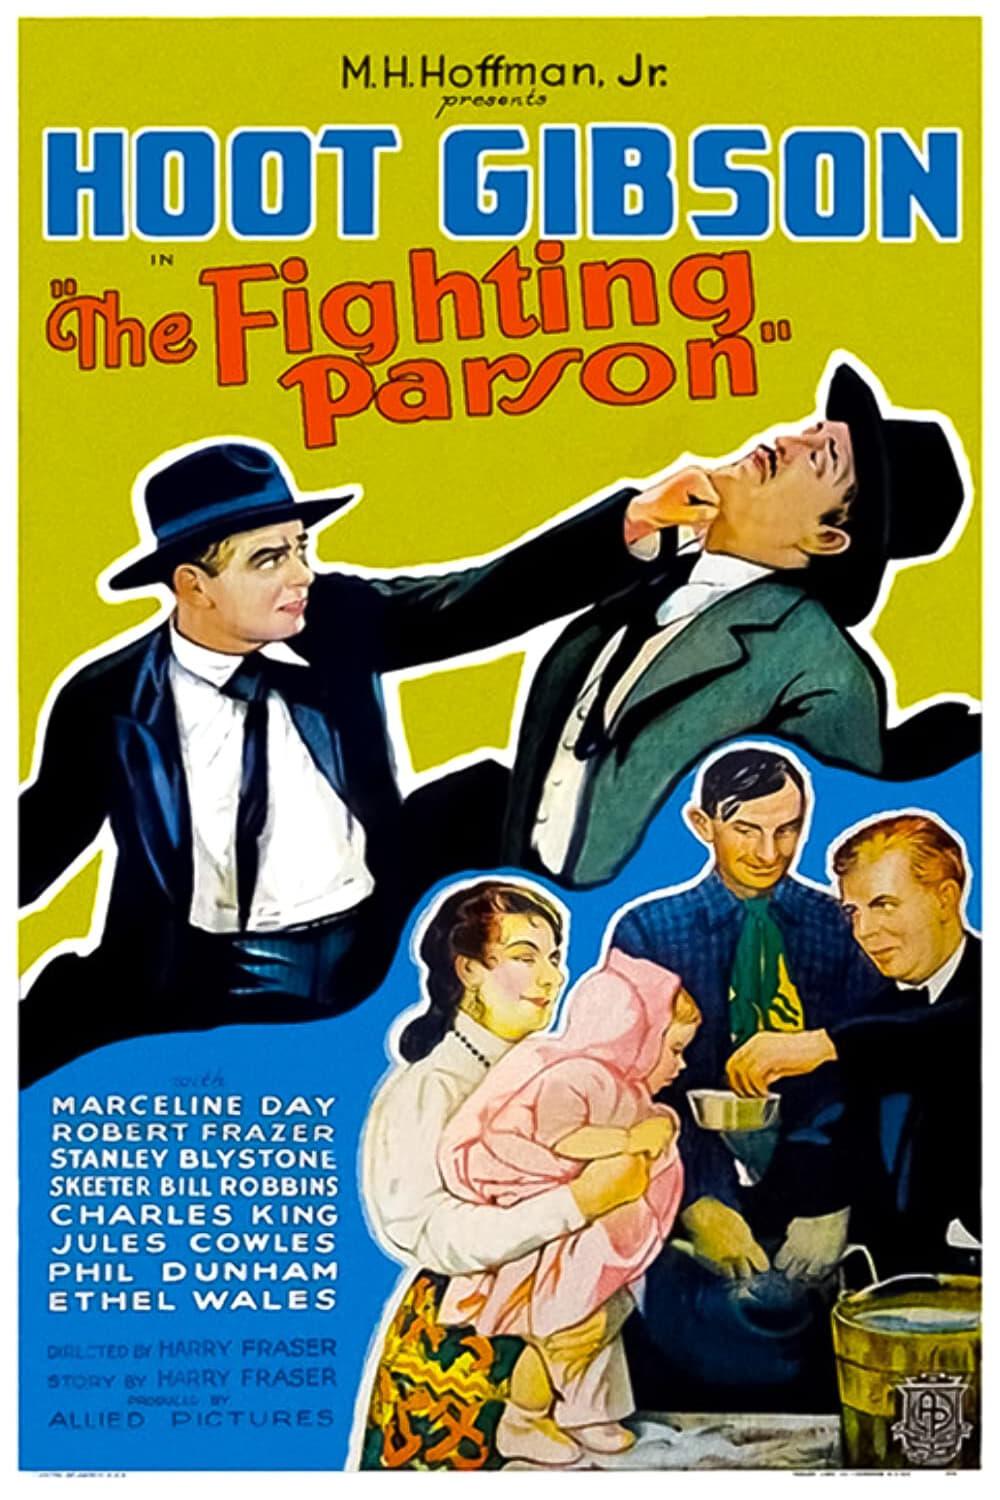 The Fighting Parson poster